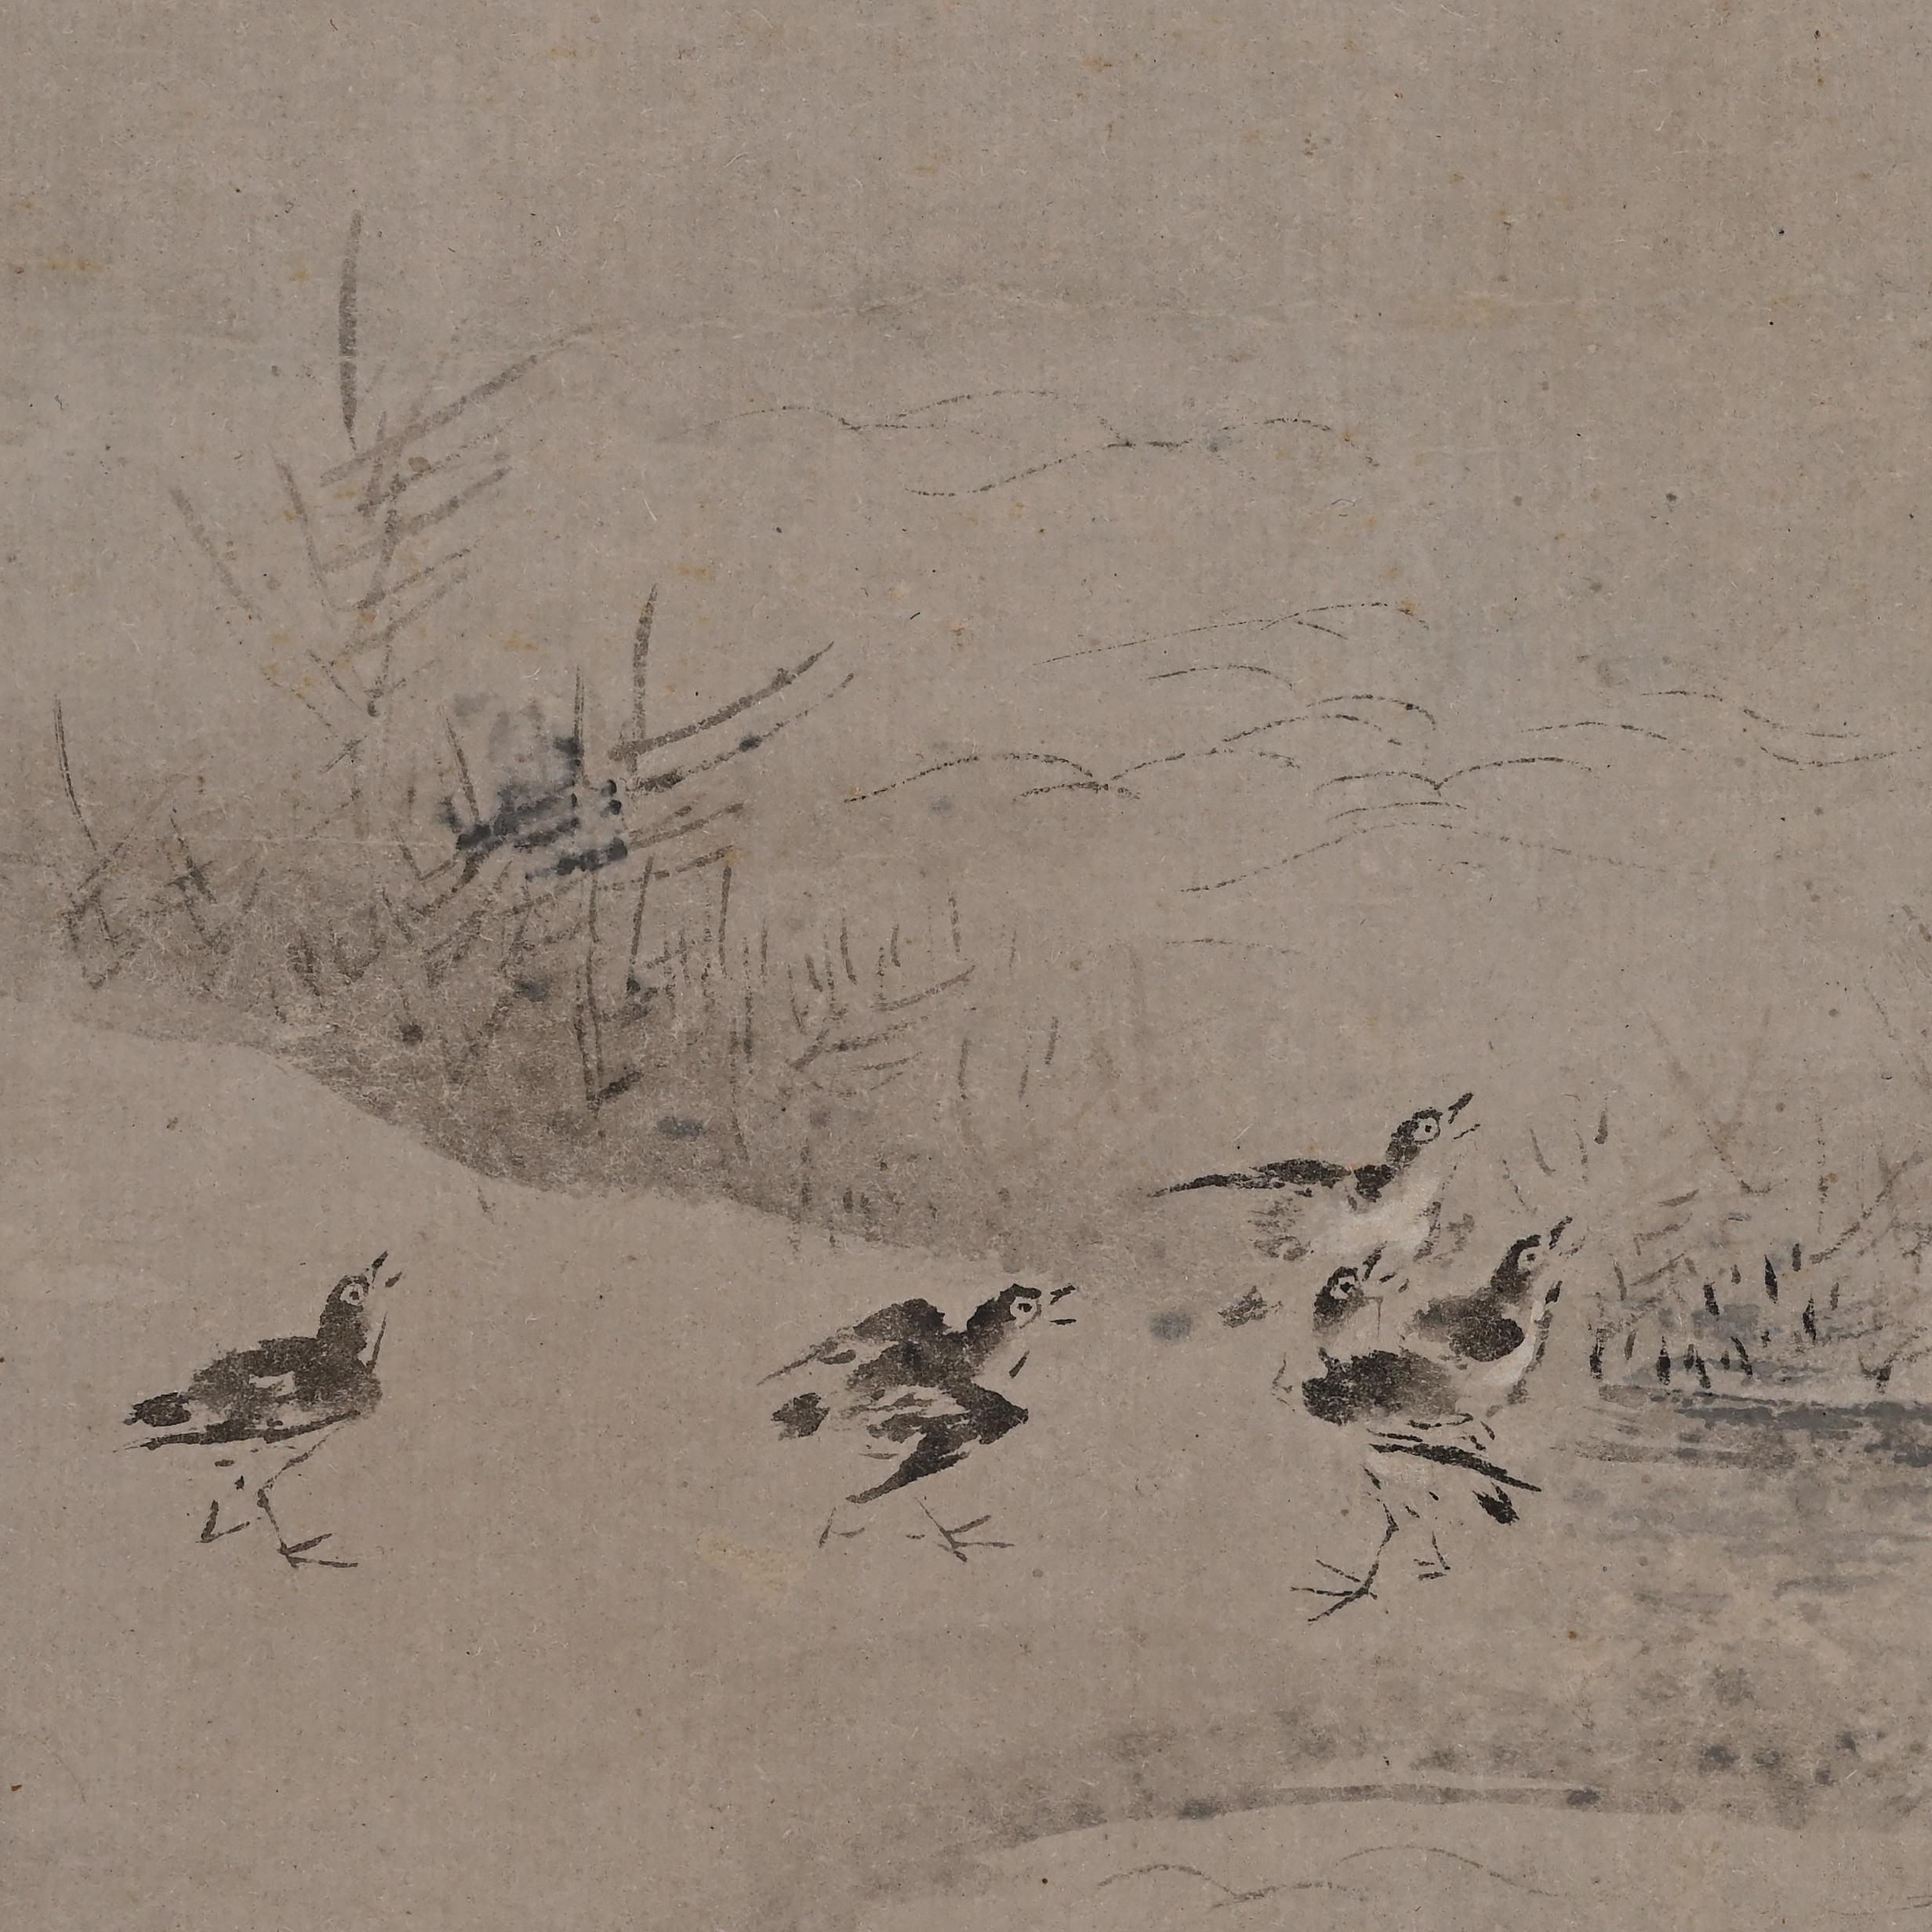 Hand-Painted 17th Century Japanese Scroll Painting. Plovers in Moonlight by Kano Ujinobu